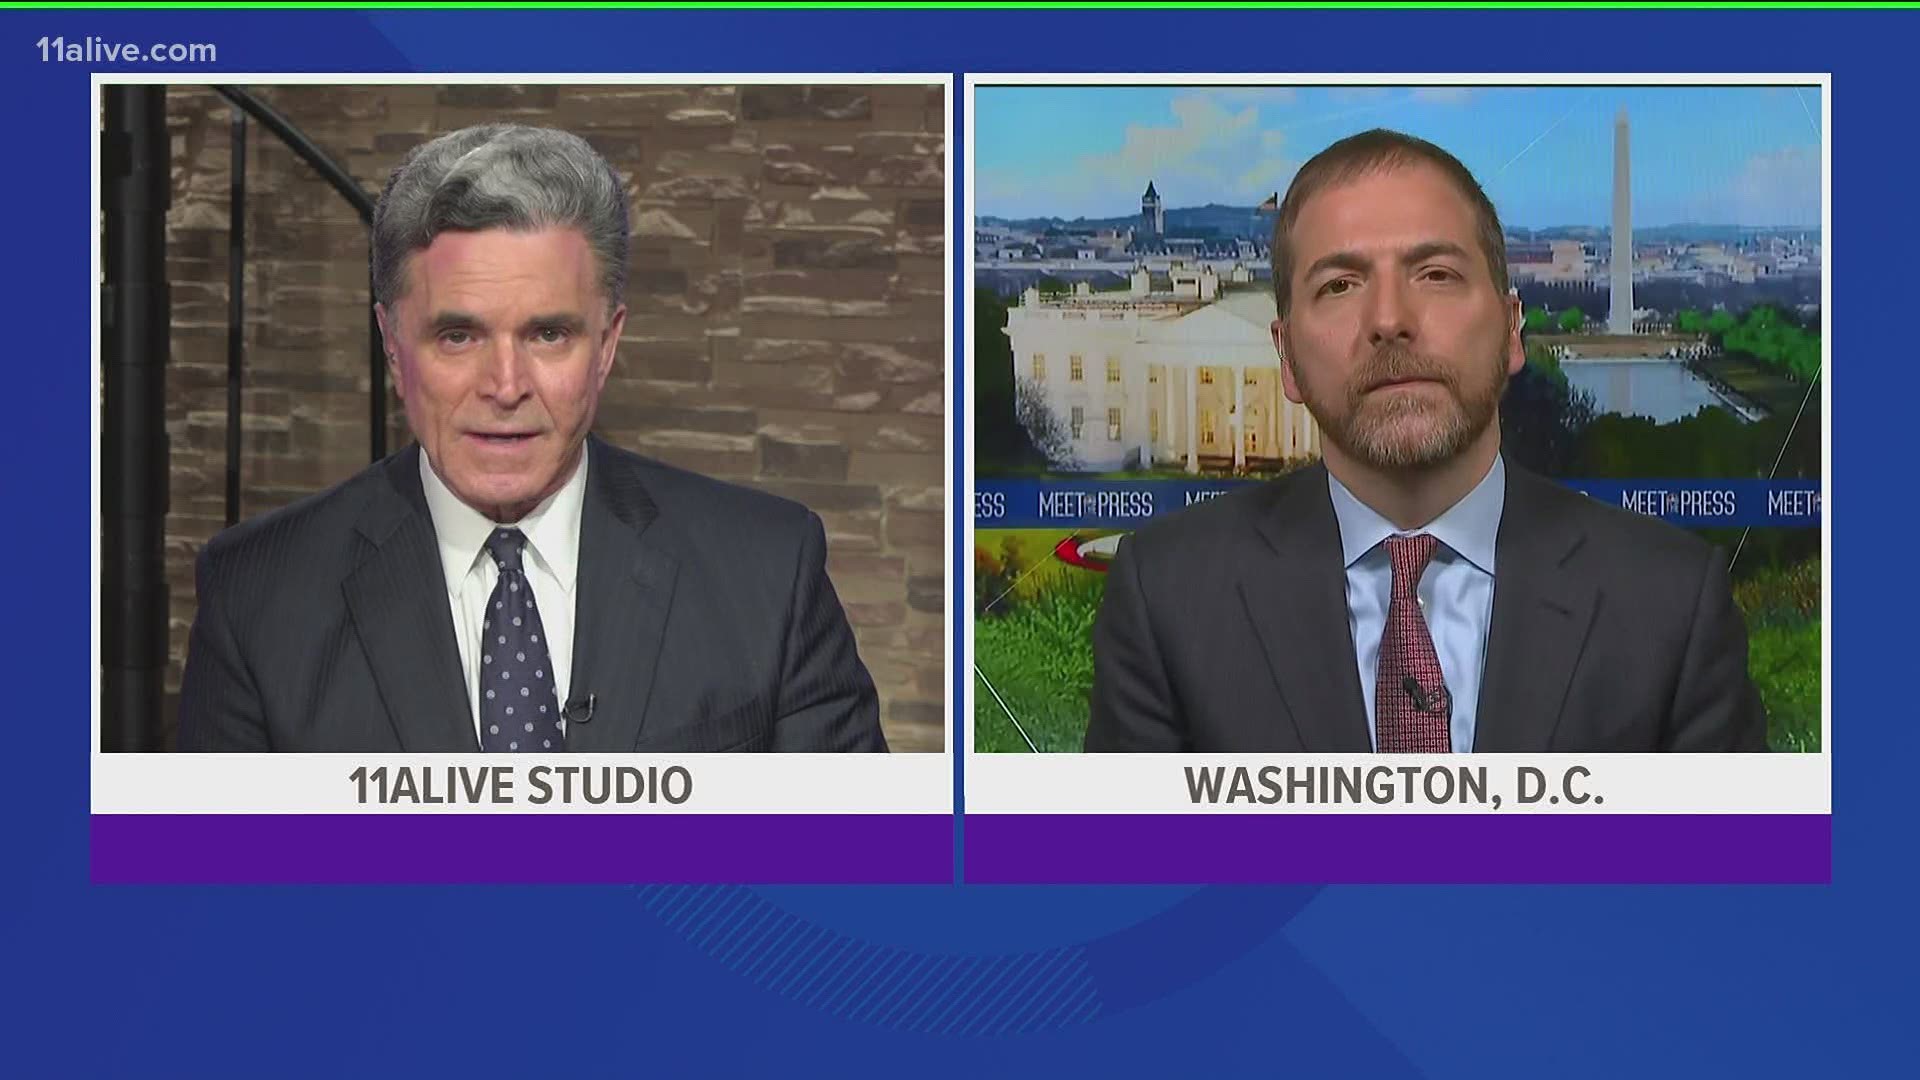 'Meet The Press' moderator Chuck Todd talks about Washington's moves on the coronavirus front with 11Alive's Jeff Hullinger.